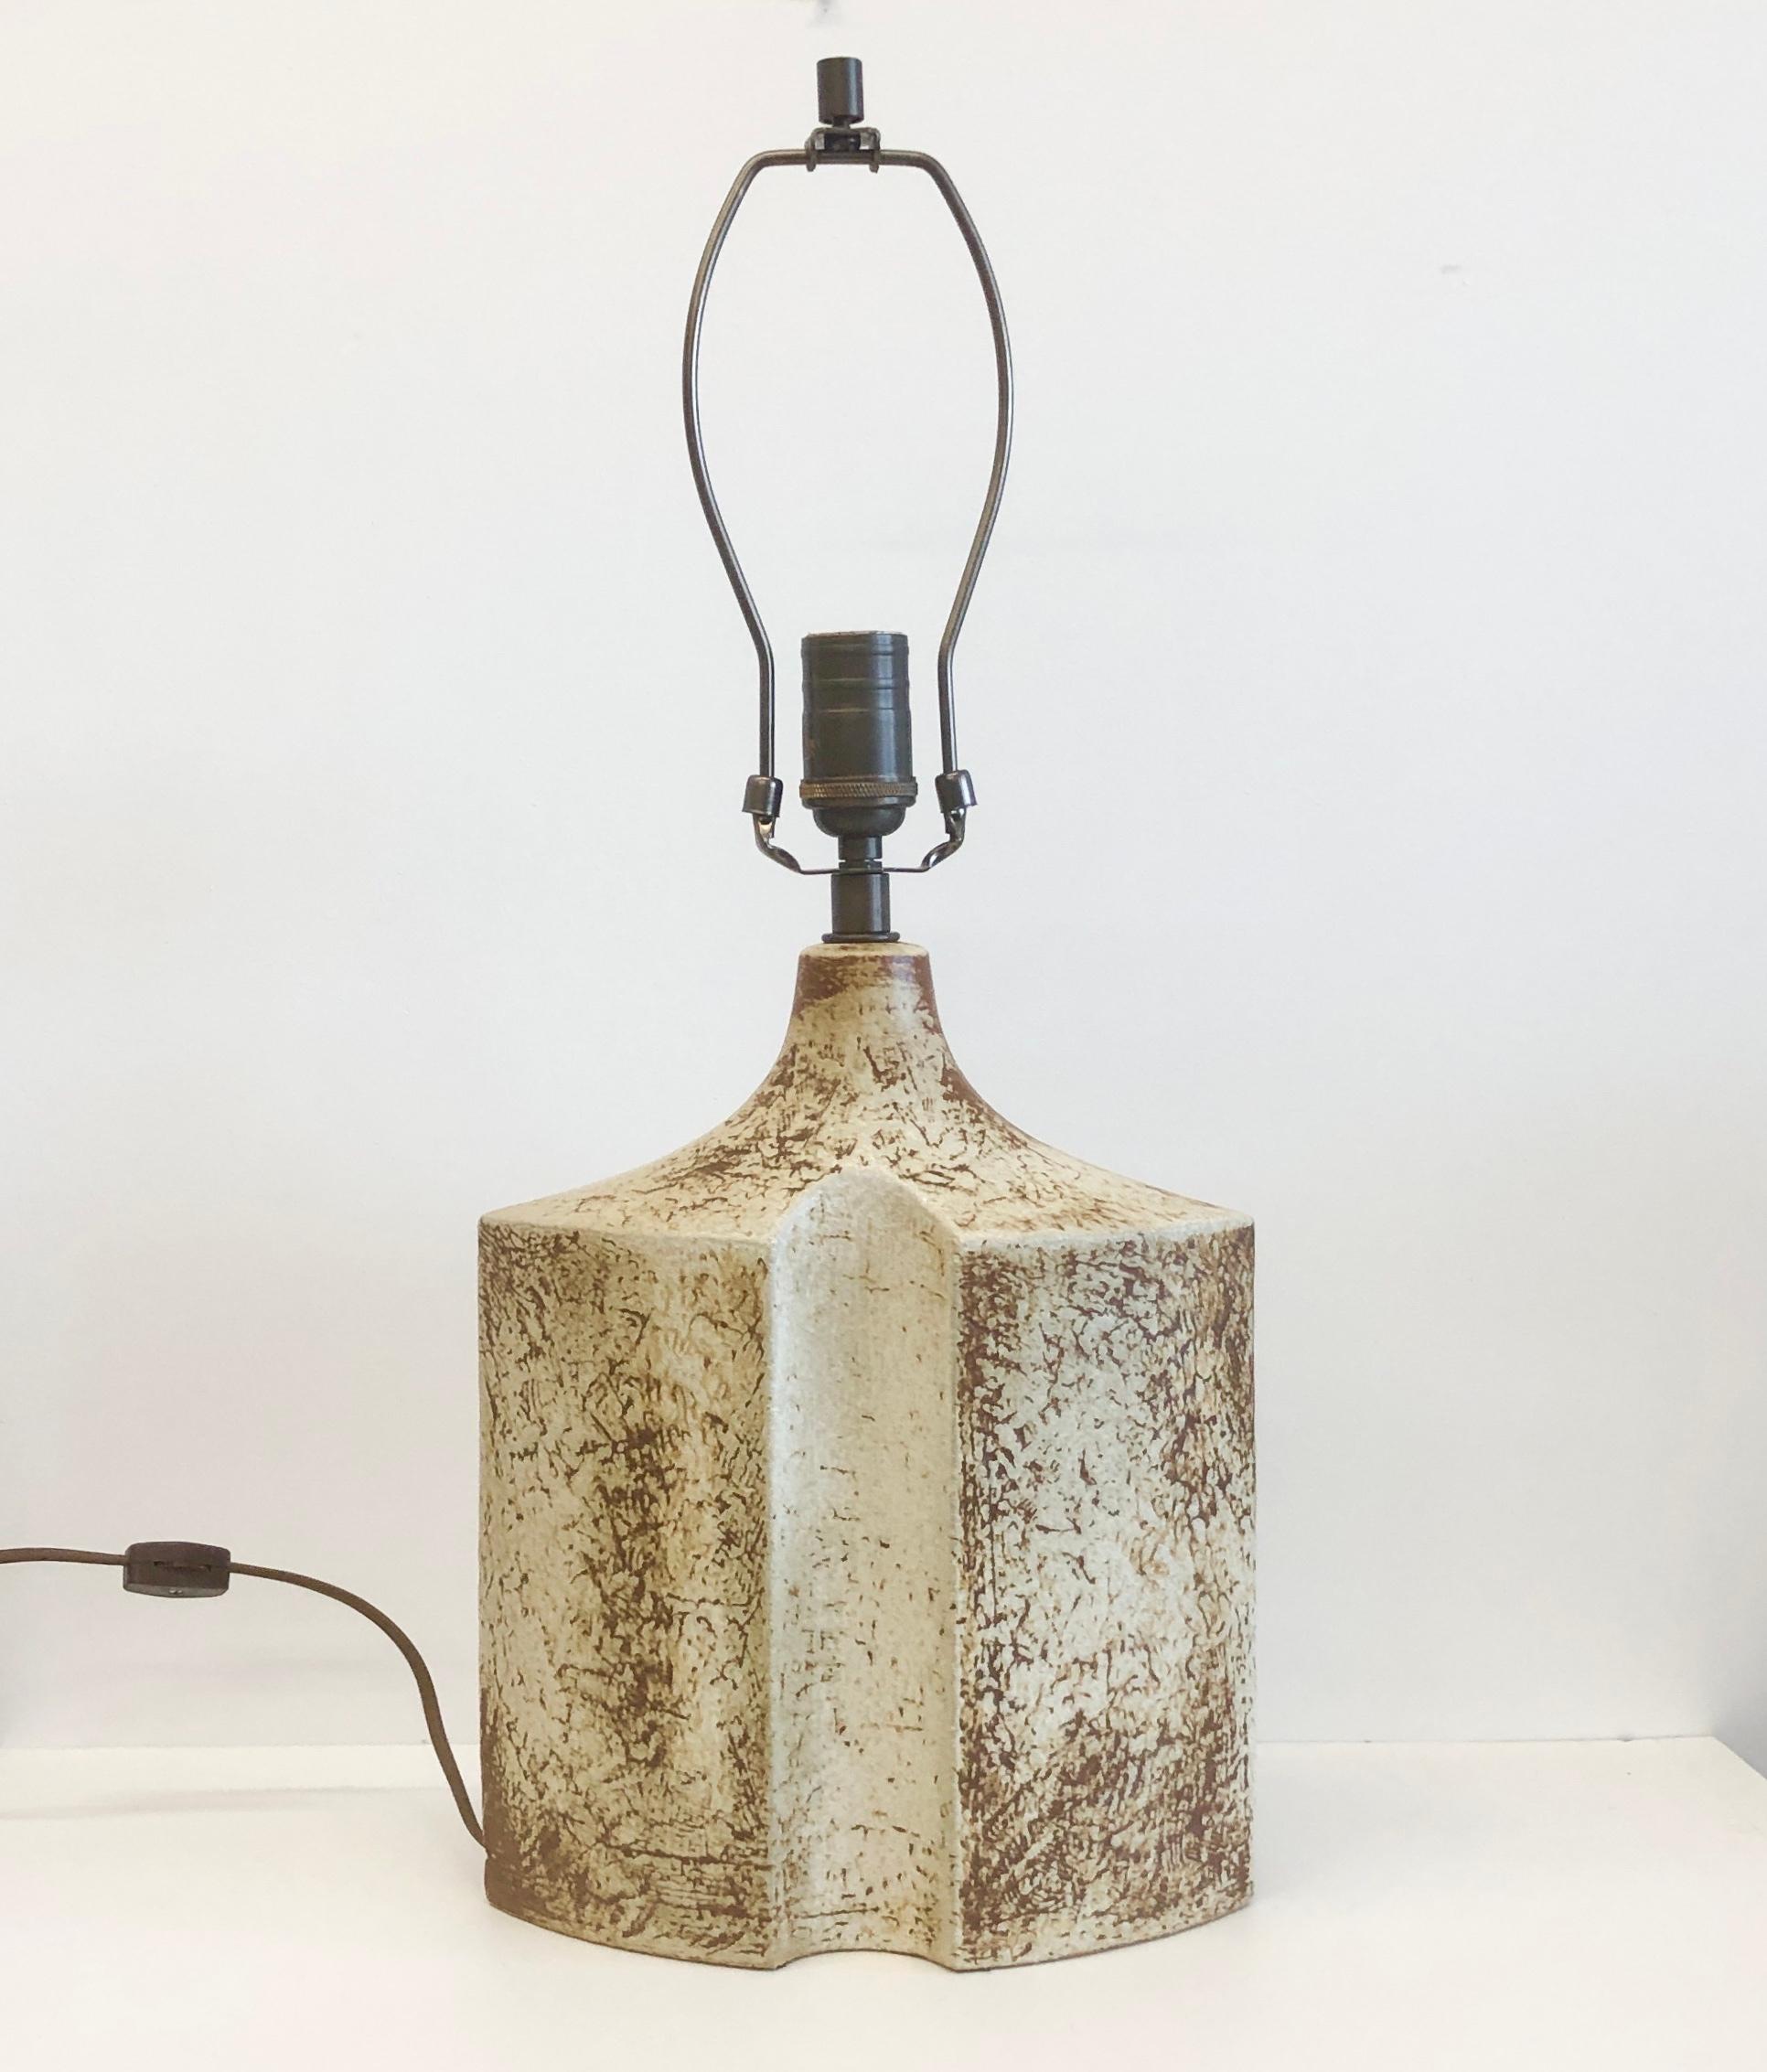  Stoneware table lamp designed by Haico Nitzsche for Søholm Pottery, Bornholm, Denmark. Circa 1970th. Newly rewired.
Dimensions: ceramic base height 12.5